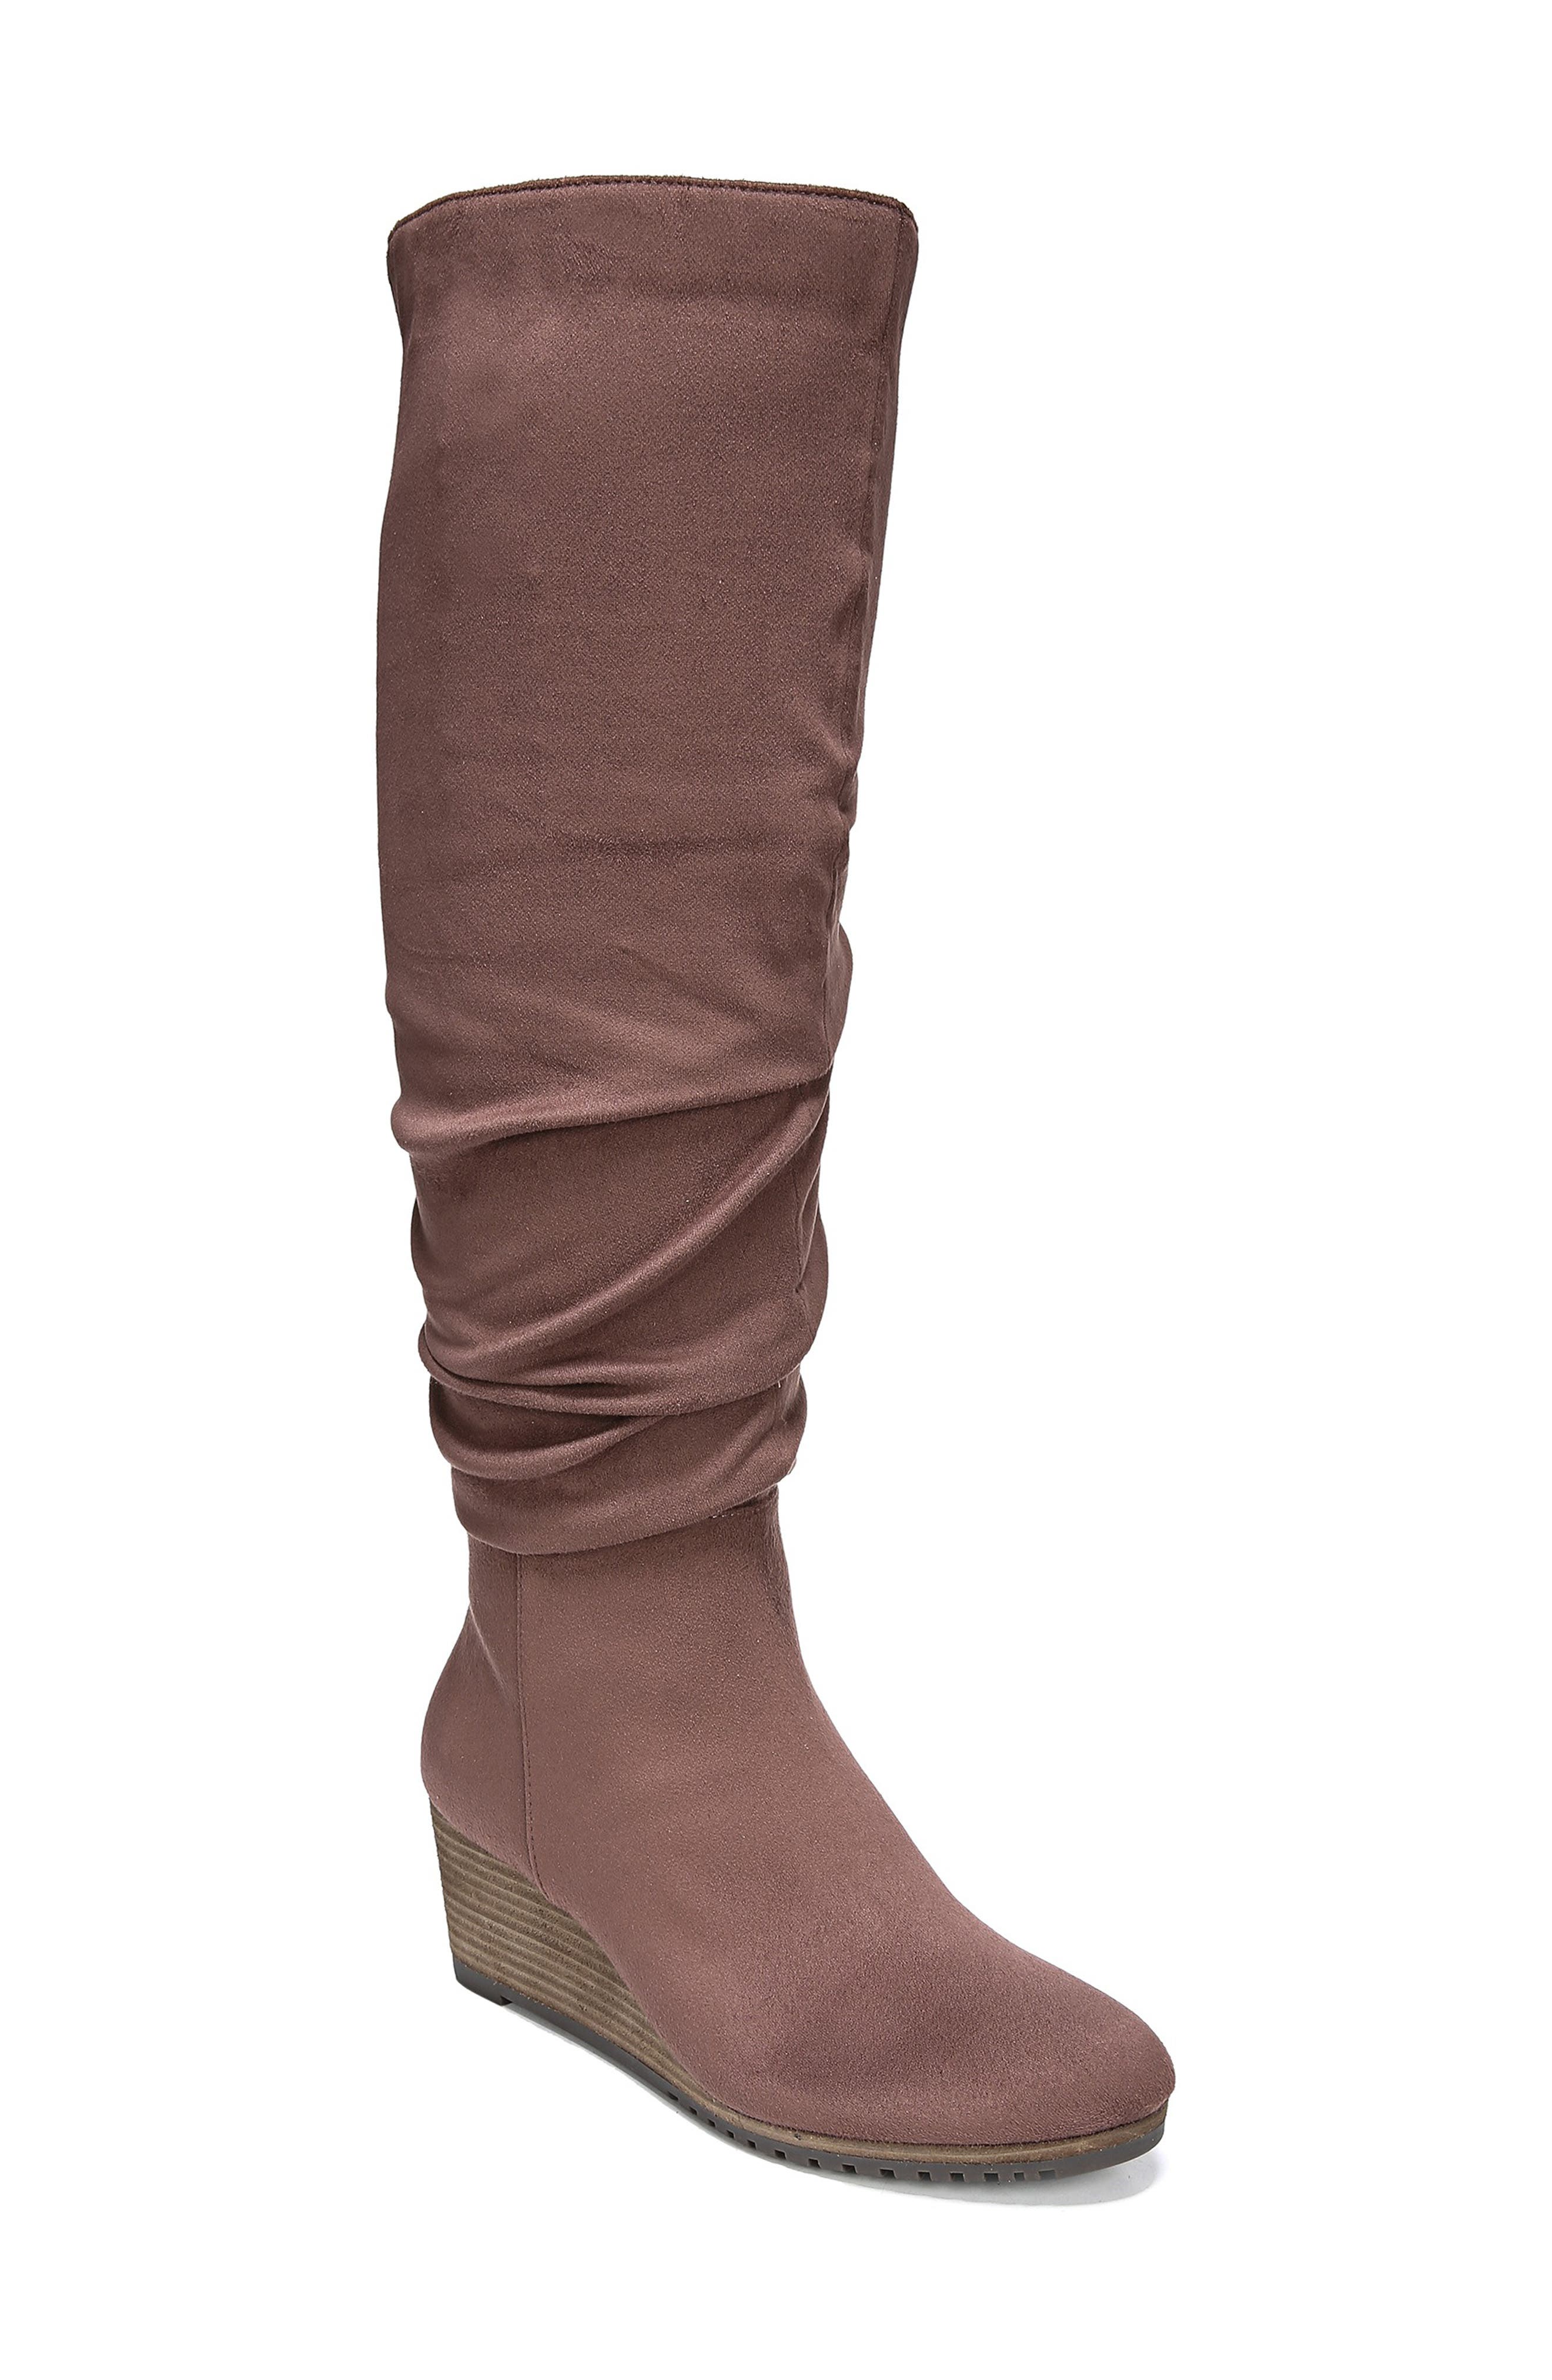 UPC 736703934358 product image for Women's Dr. Scholls Central Boot, Size 10 M - Brown | upcitemdb.com